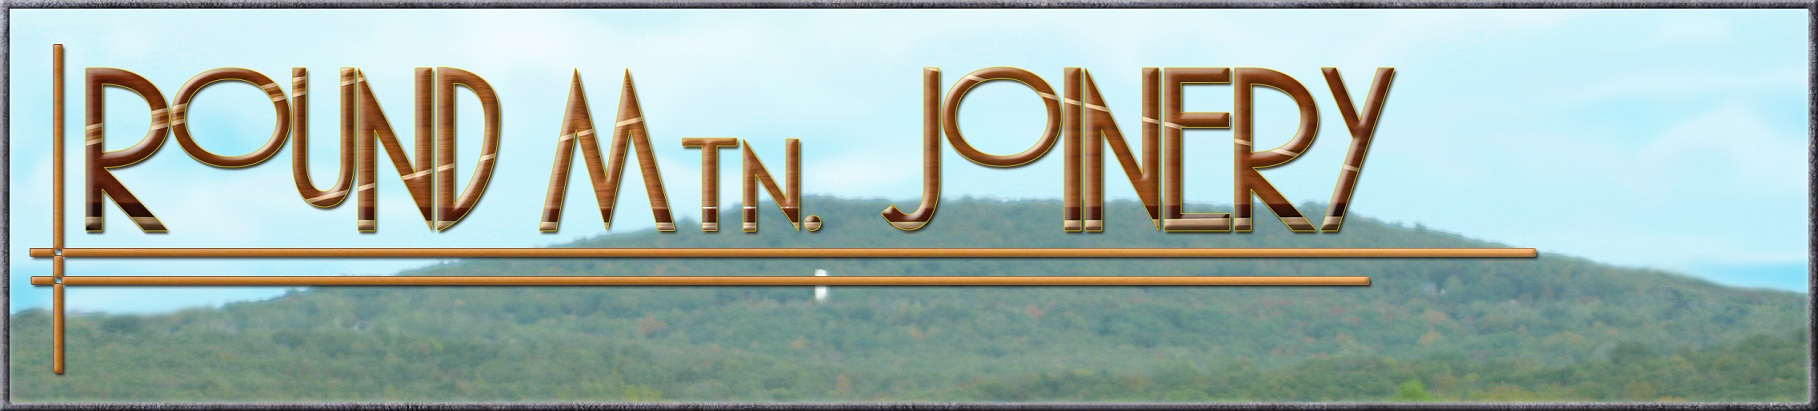 Round Mountain Joinery Banner